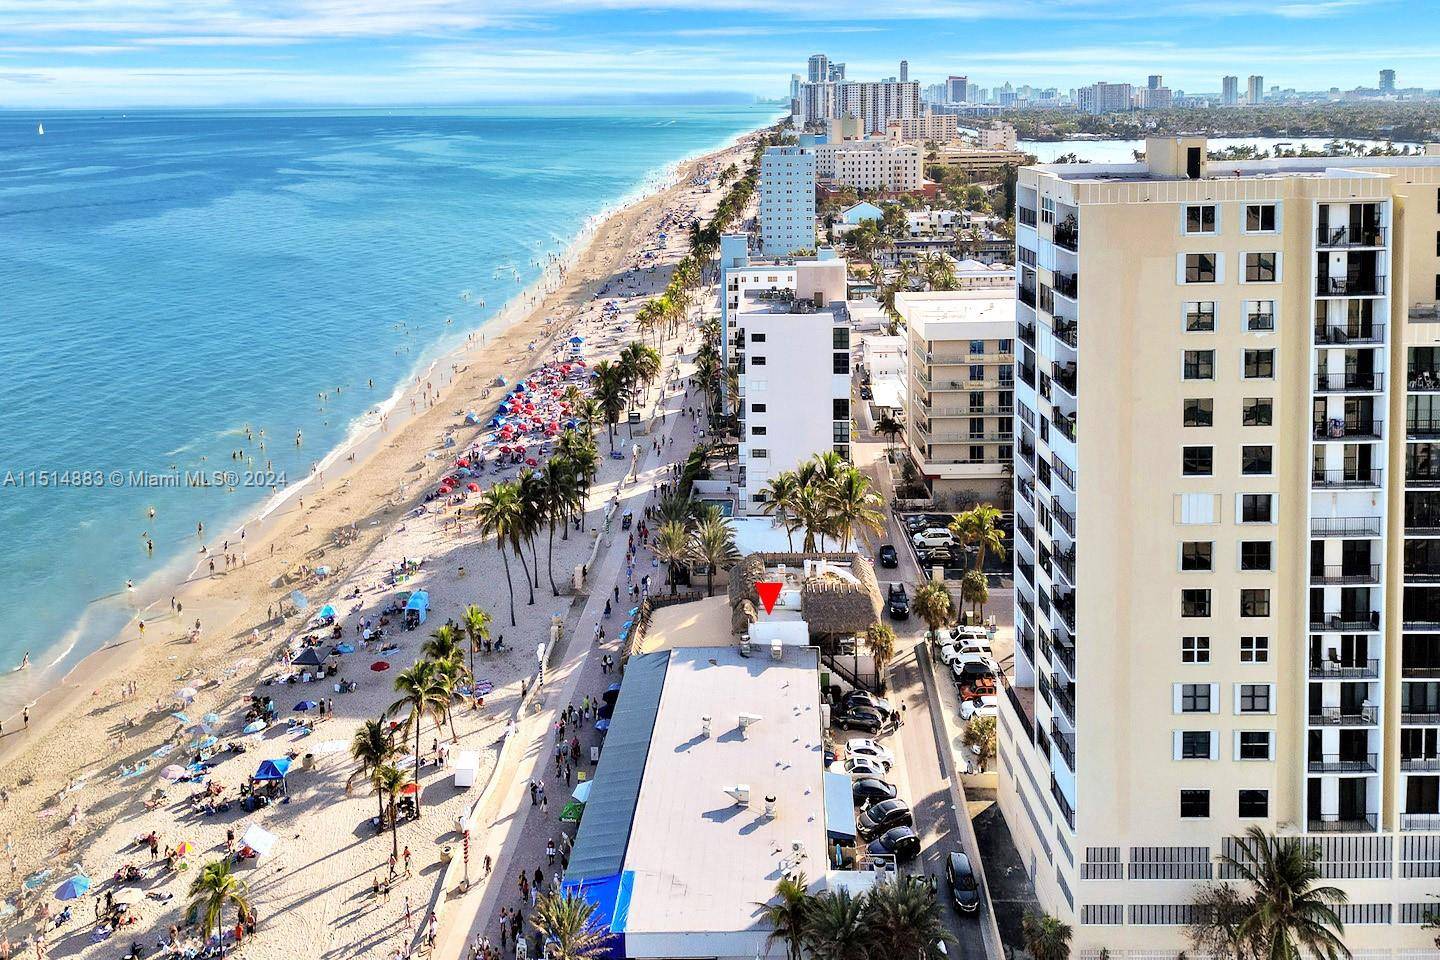 Beach Efficiency room, 3500 monthly, this is short term rental Monthly Weekly Welcome to our perfect Efficiency apartment with Sleeper Sofa located directly on the stunning Hollywood Beach and the ...